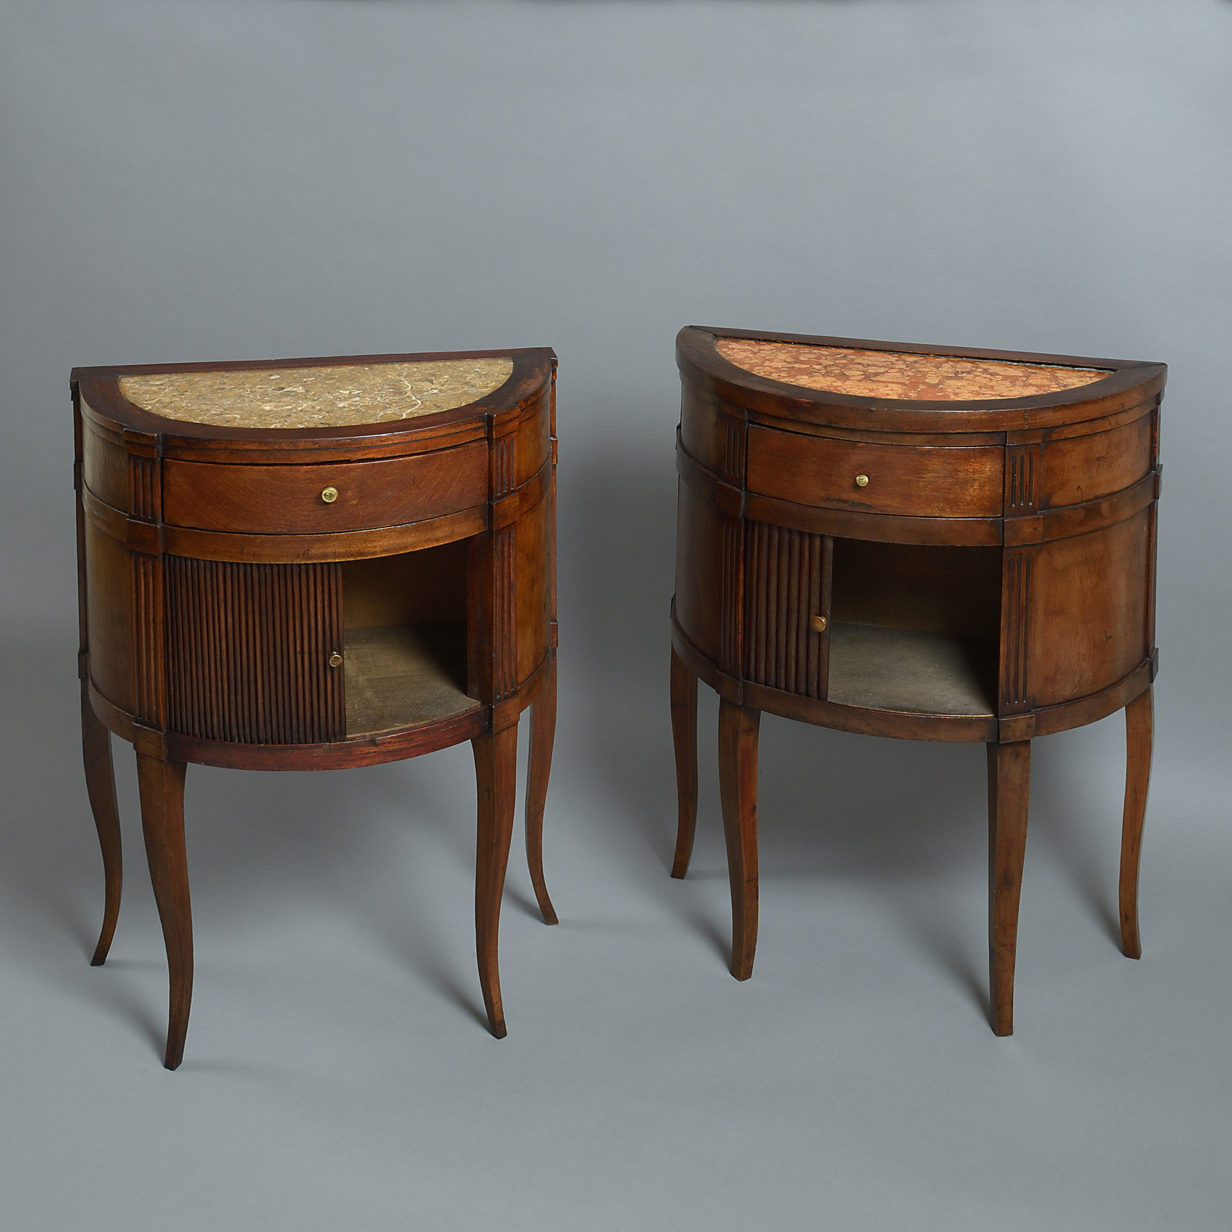 A matched pair of late 18th century bedside commodes